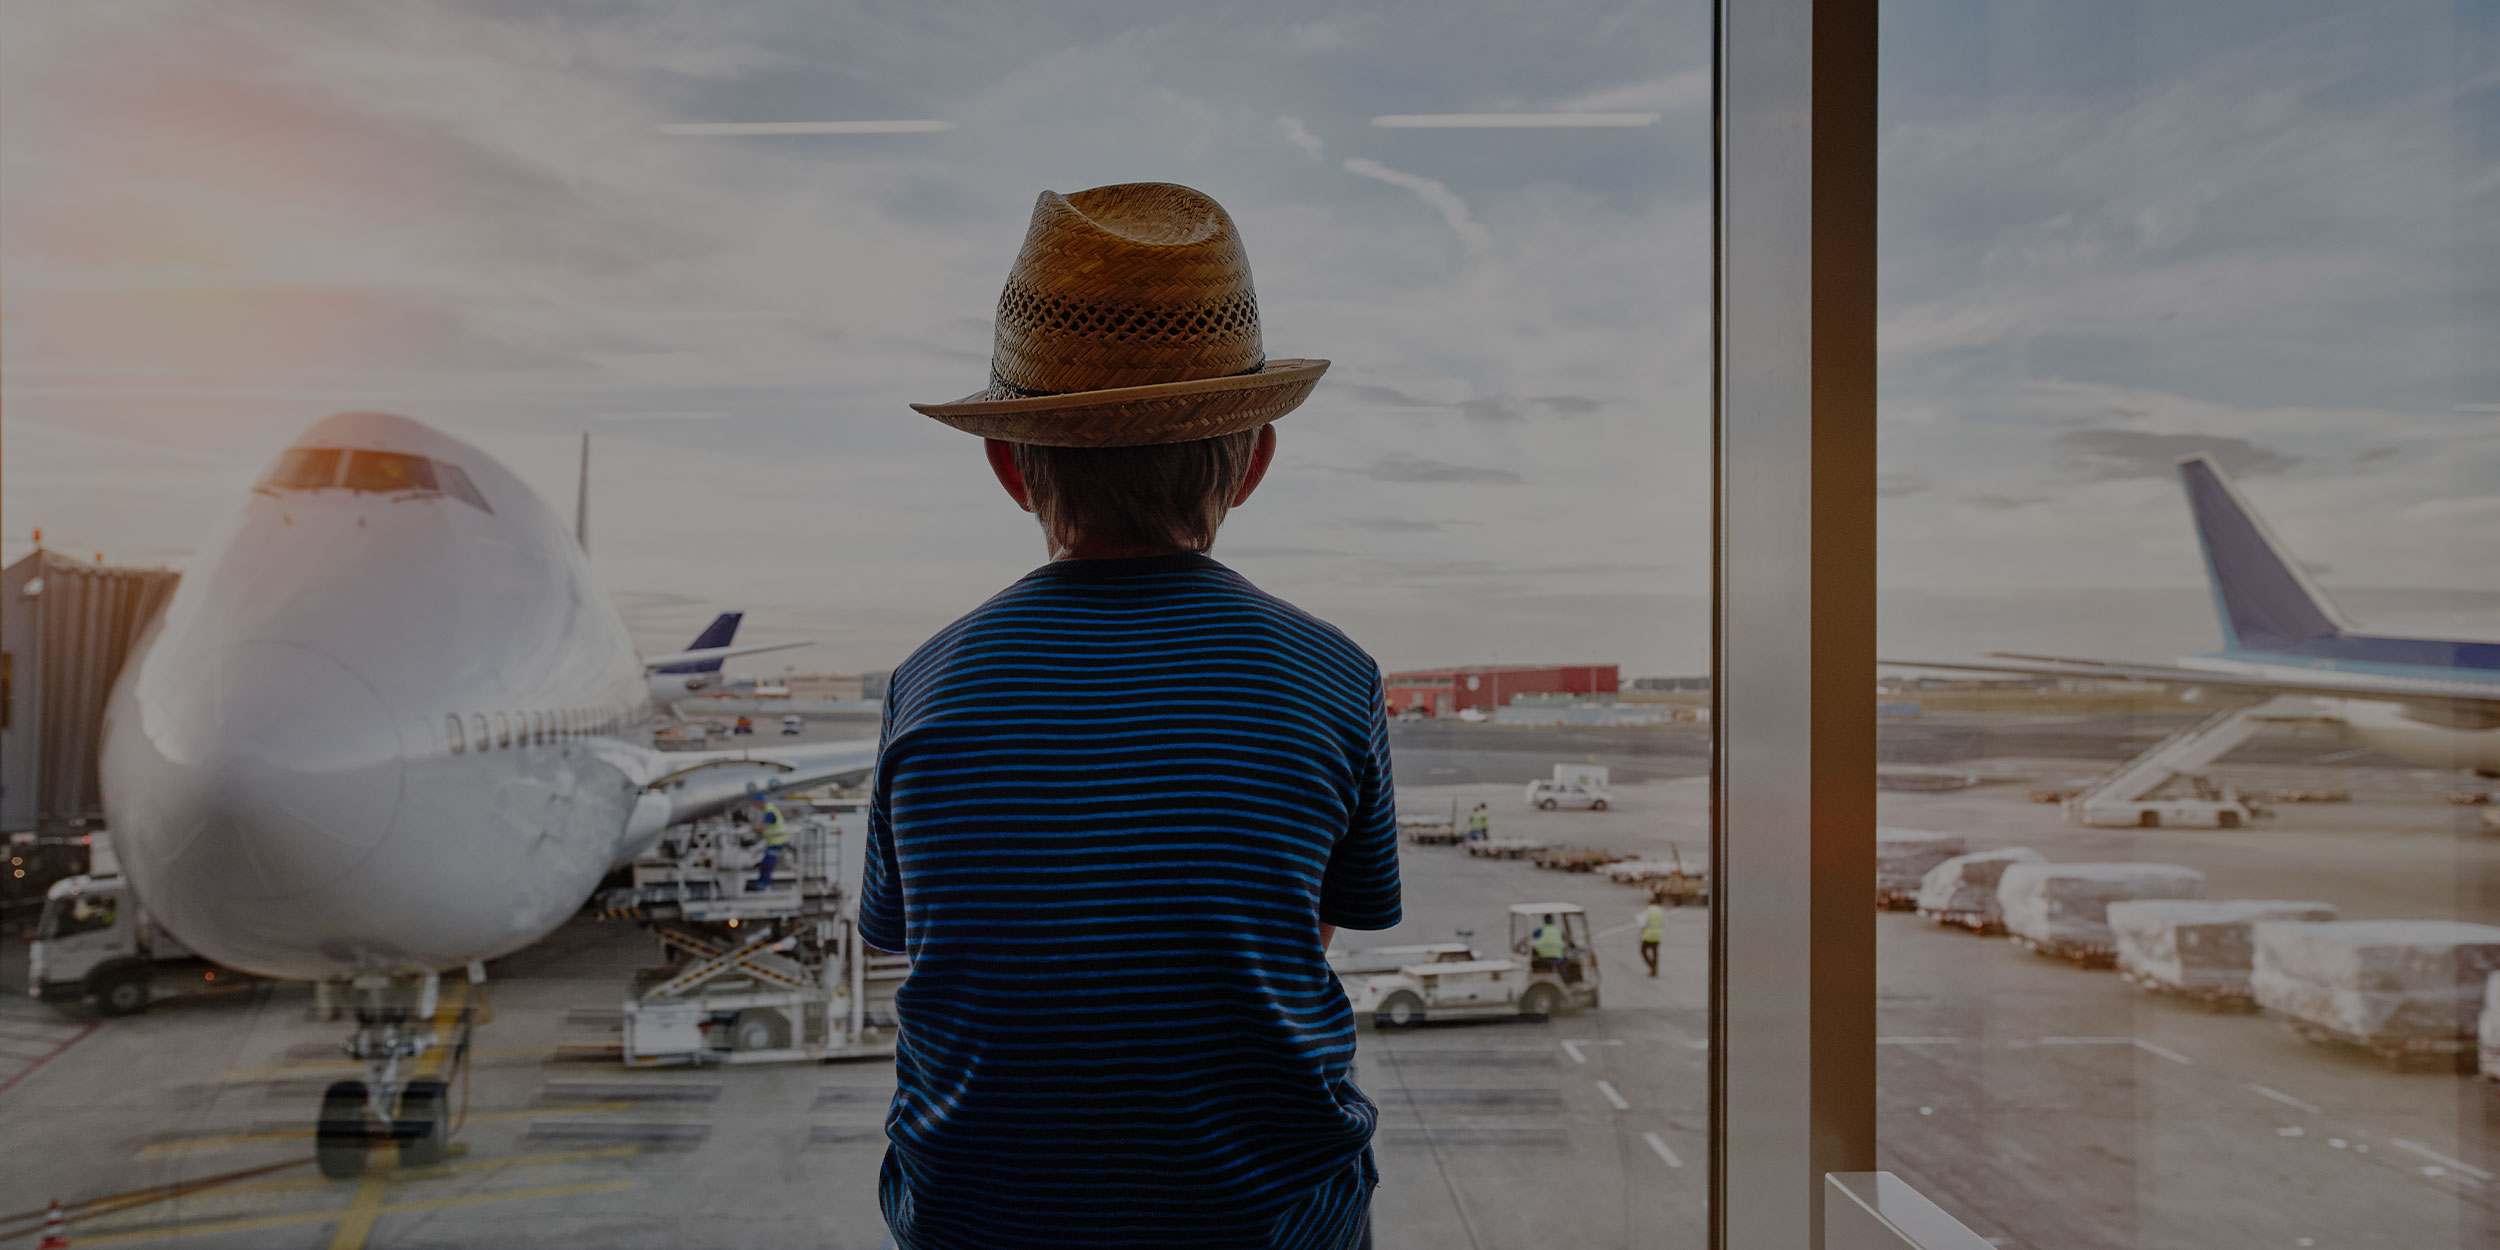 boy looking out the window at airport